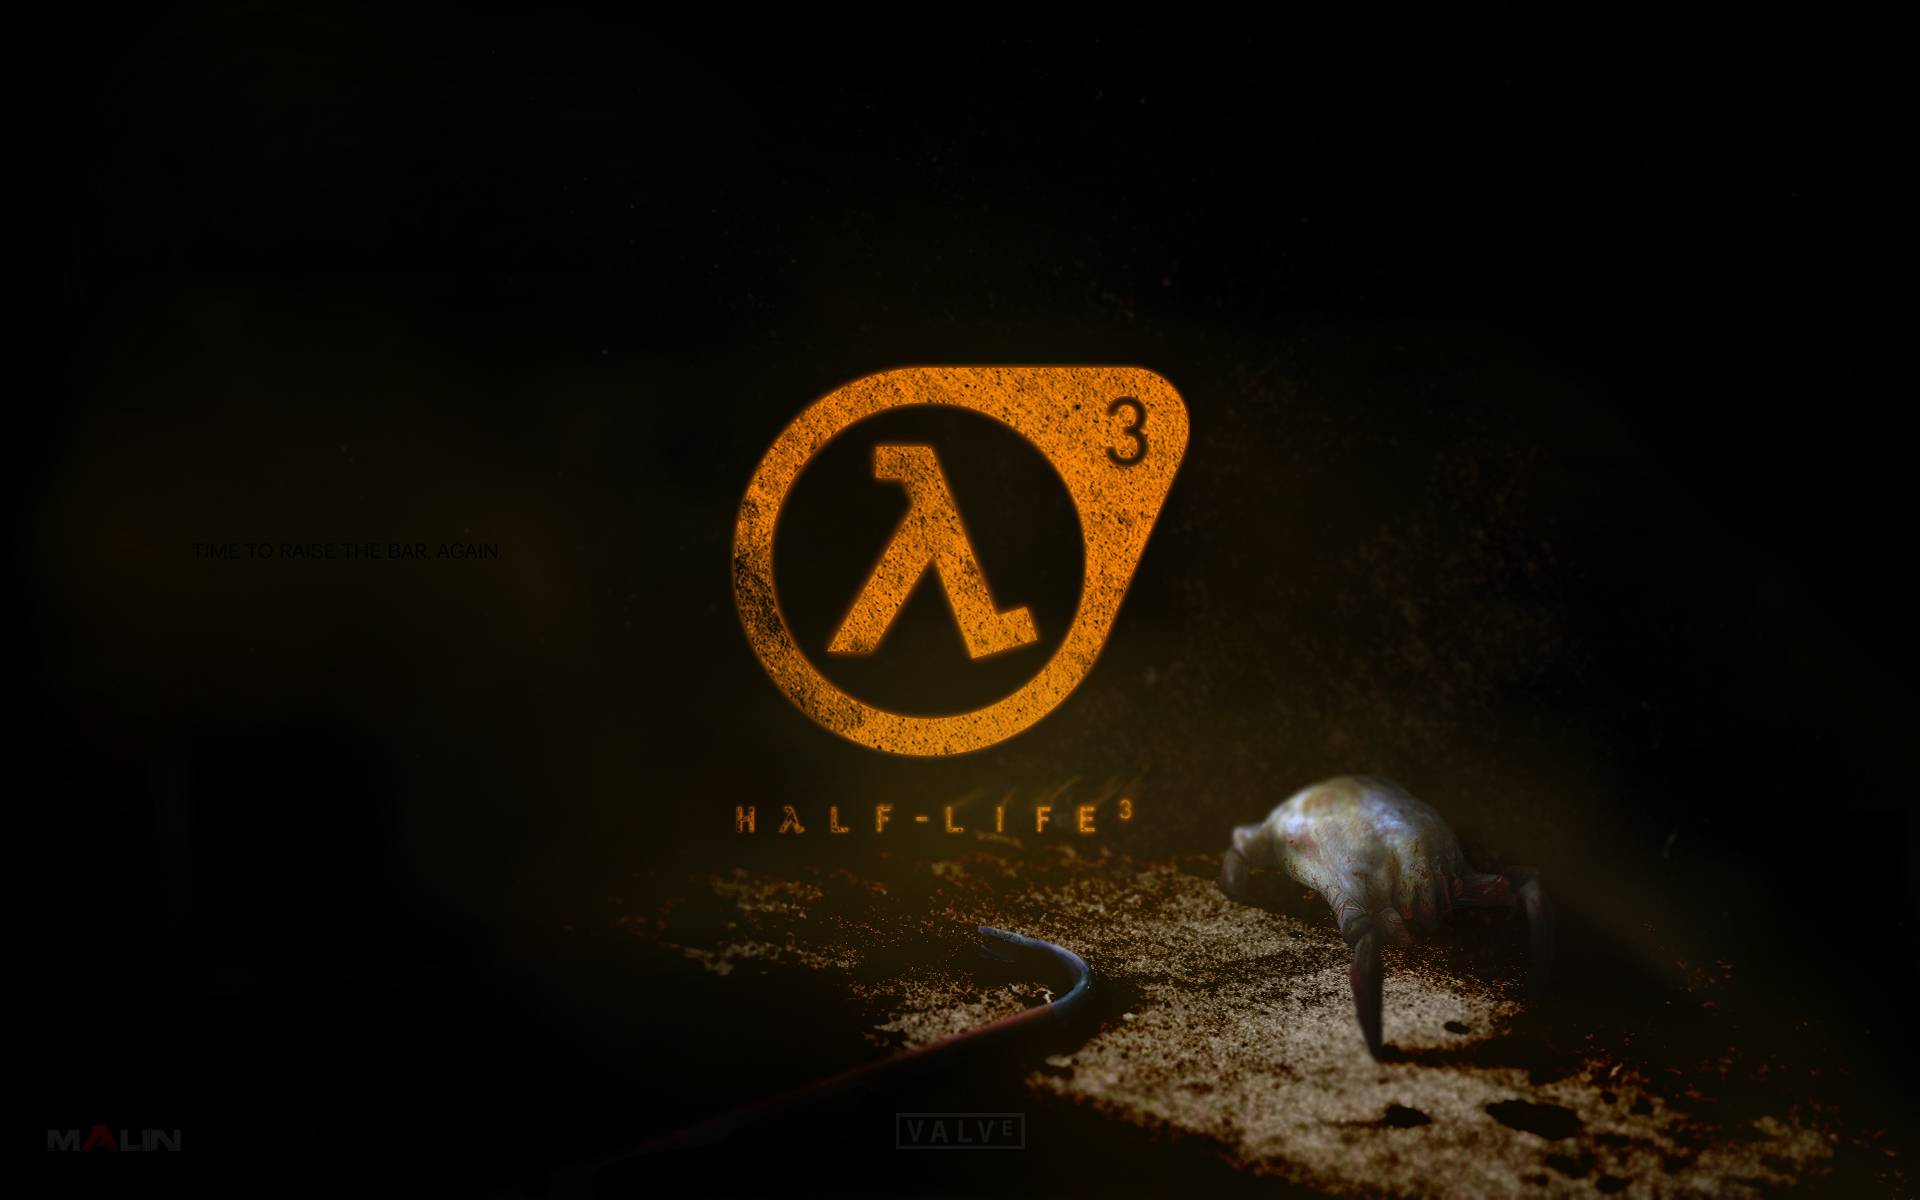 Half-Life 3 Confirmed: Anonymous Coded Leak Spills The Details